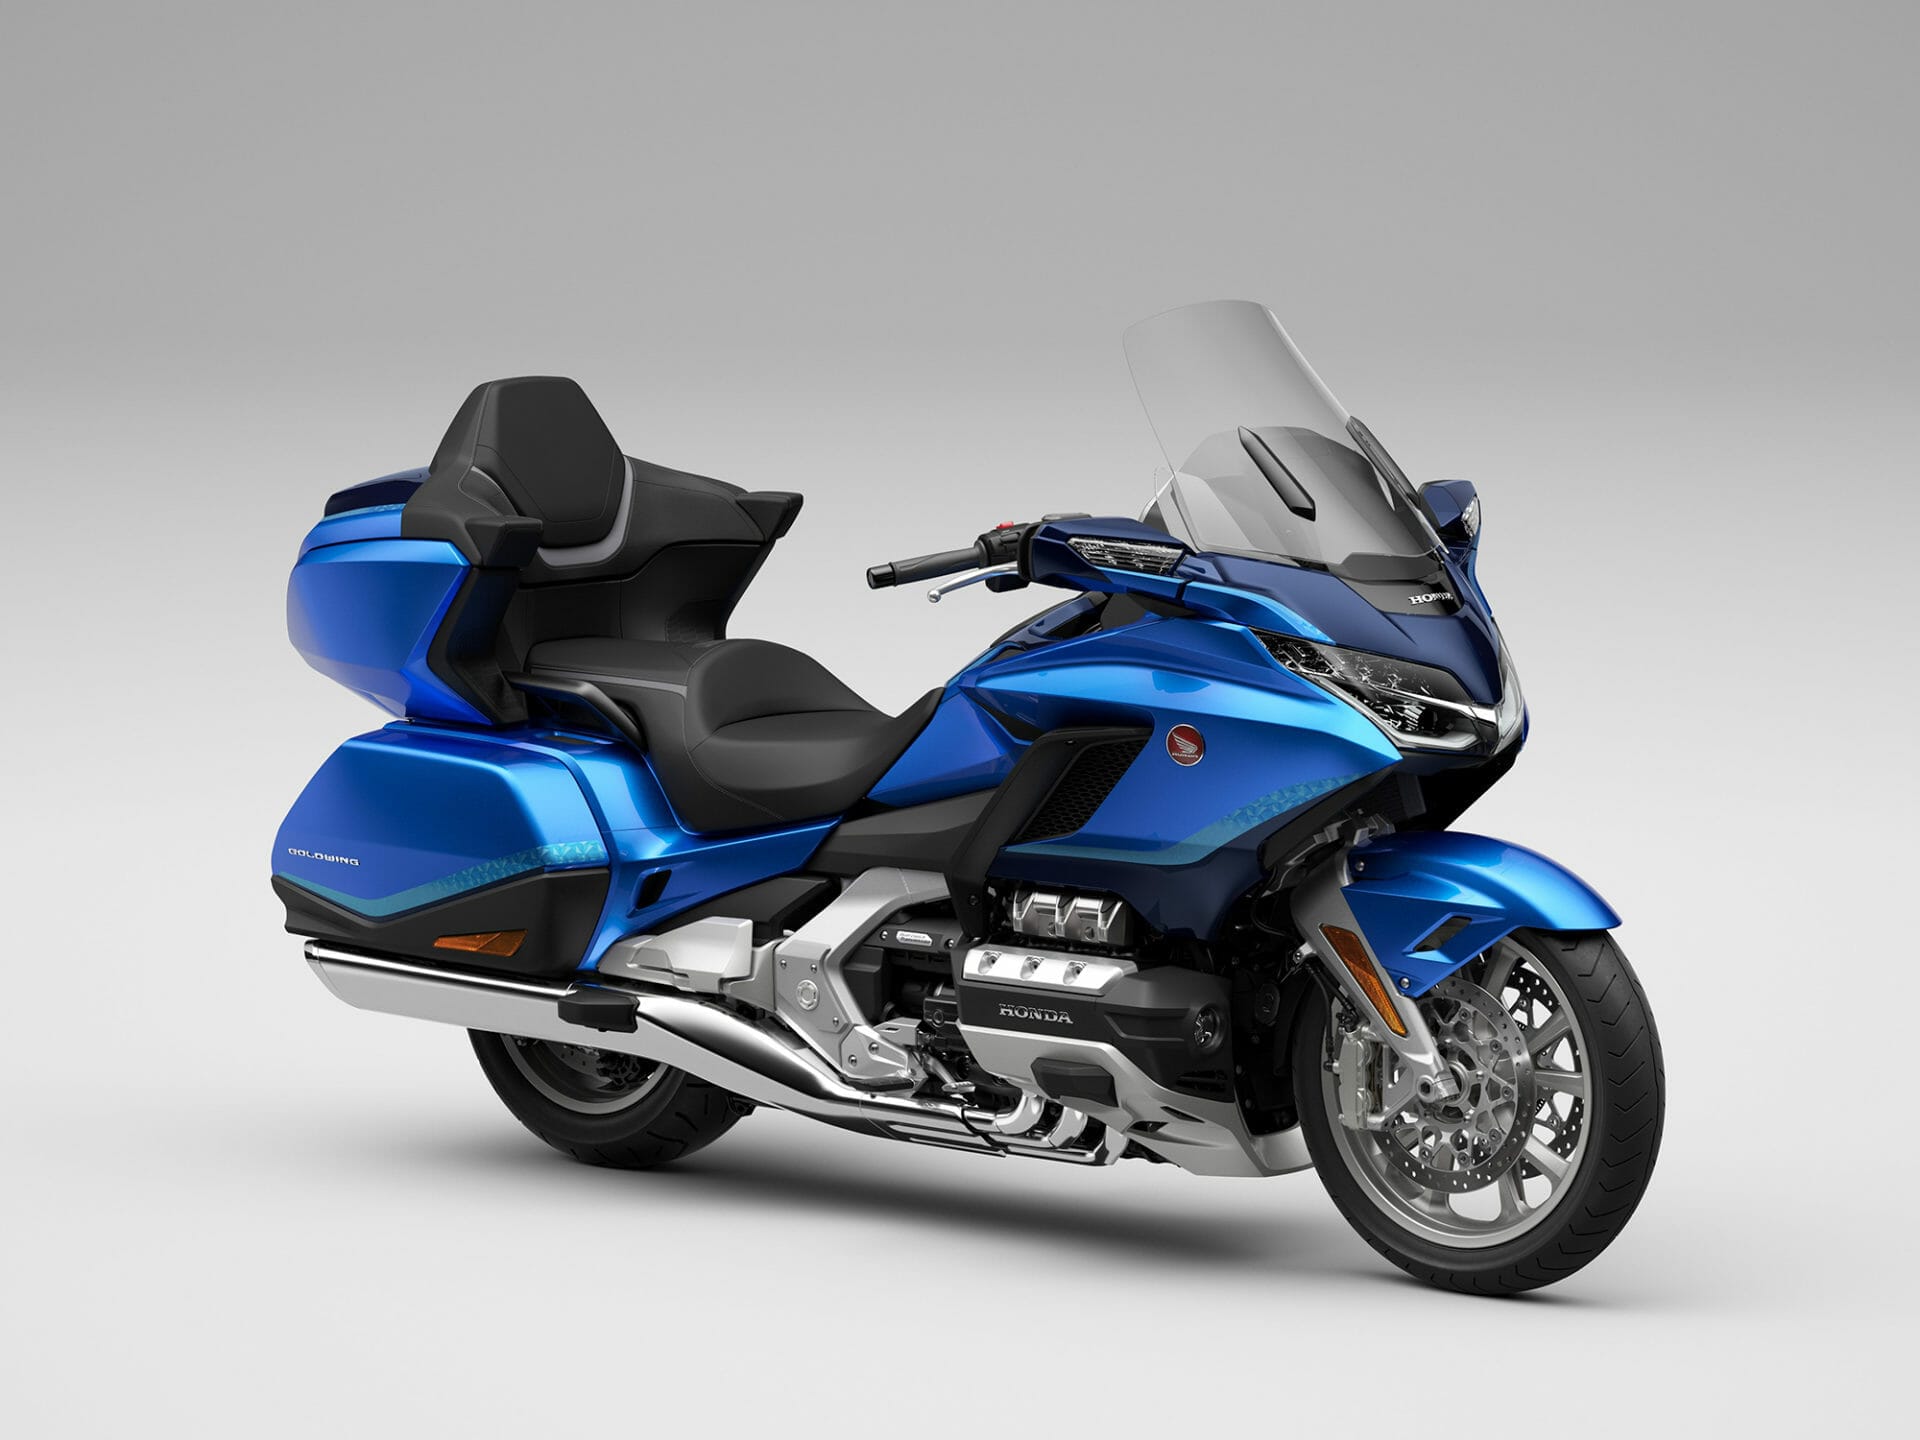 Recall - incorrect ignition timing on Gold Wing. - MOTORCYCLES.NEWS